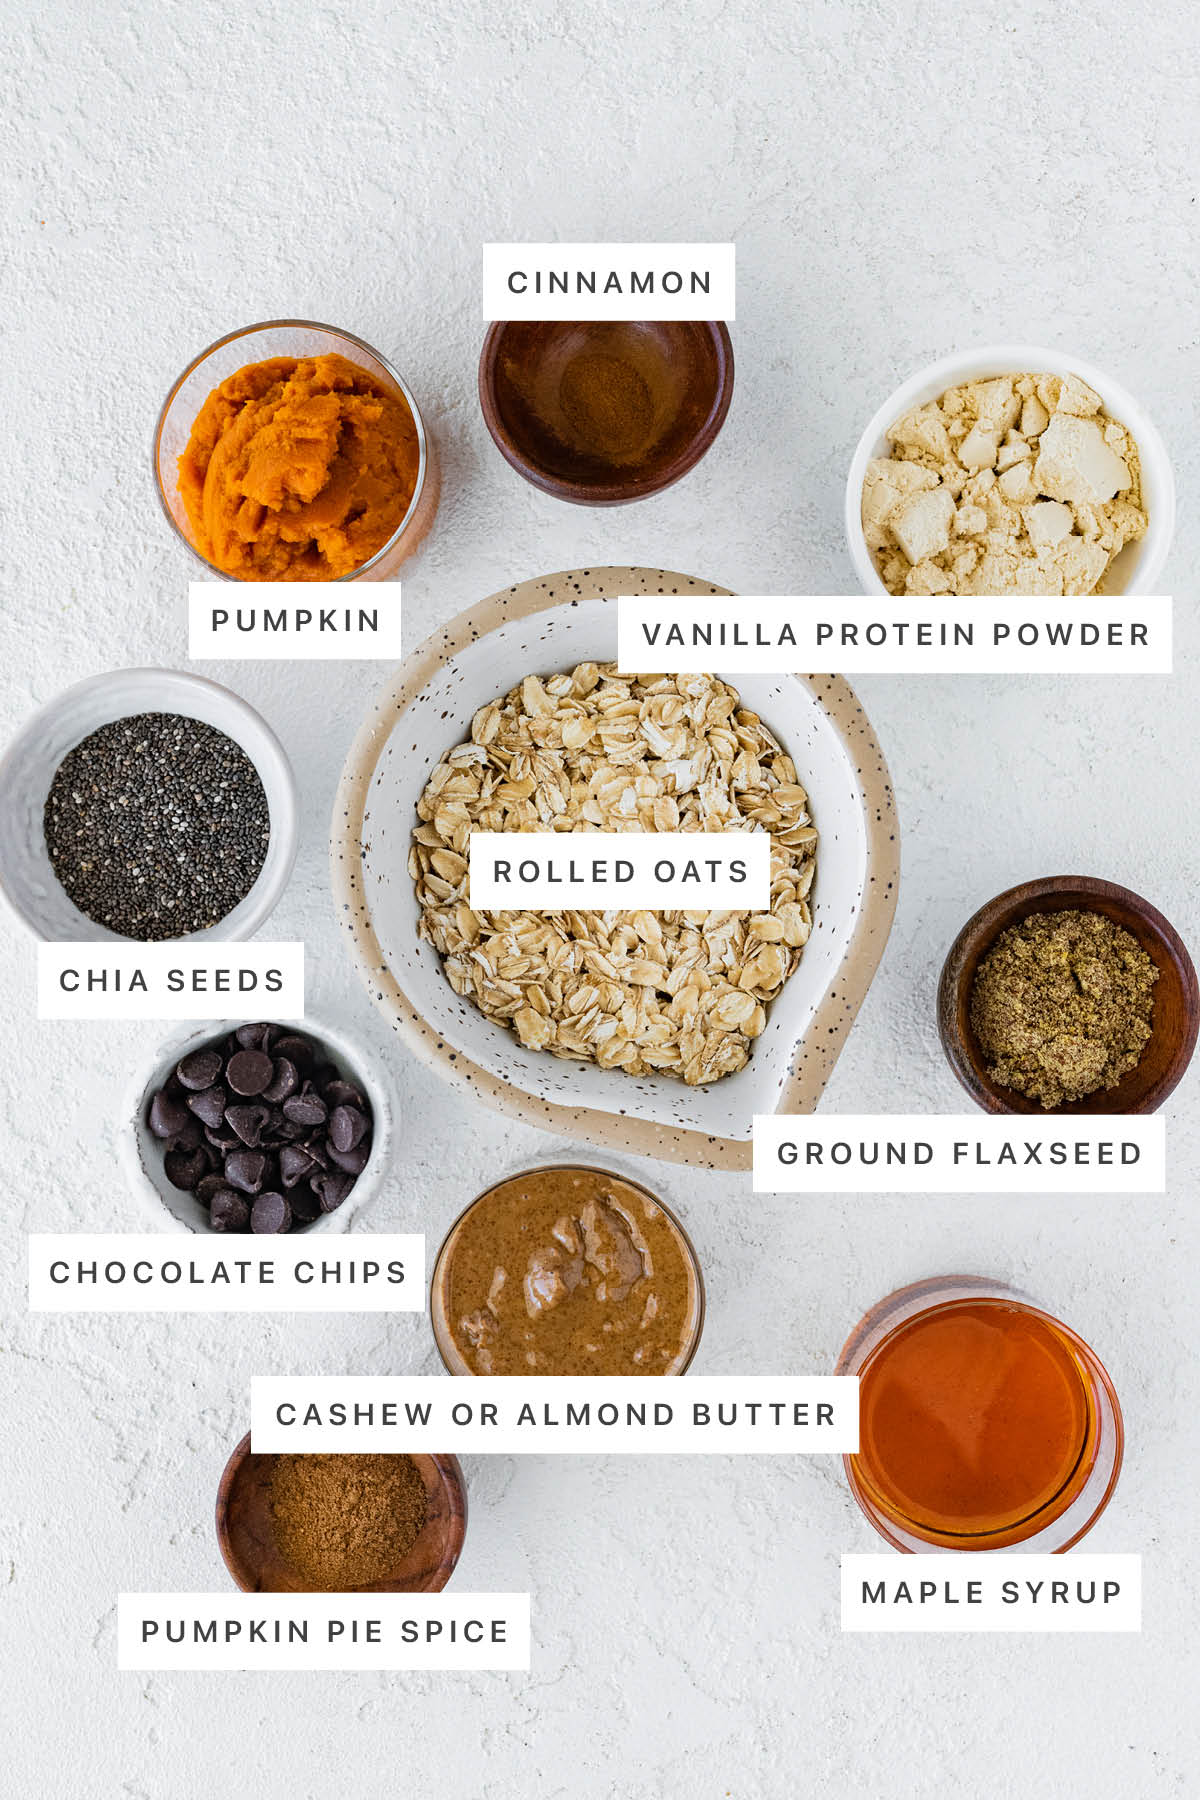 Ingredients measured out to make Pumpkin Protein Balls: pumpkin, cinnamon, vanilla protein powder, chia seeds, rolled oats, ground flaxseed, chocolate chips, almond butter, pumpkin pie spice and maple syrup.